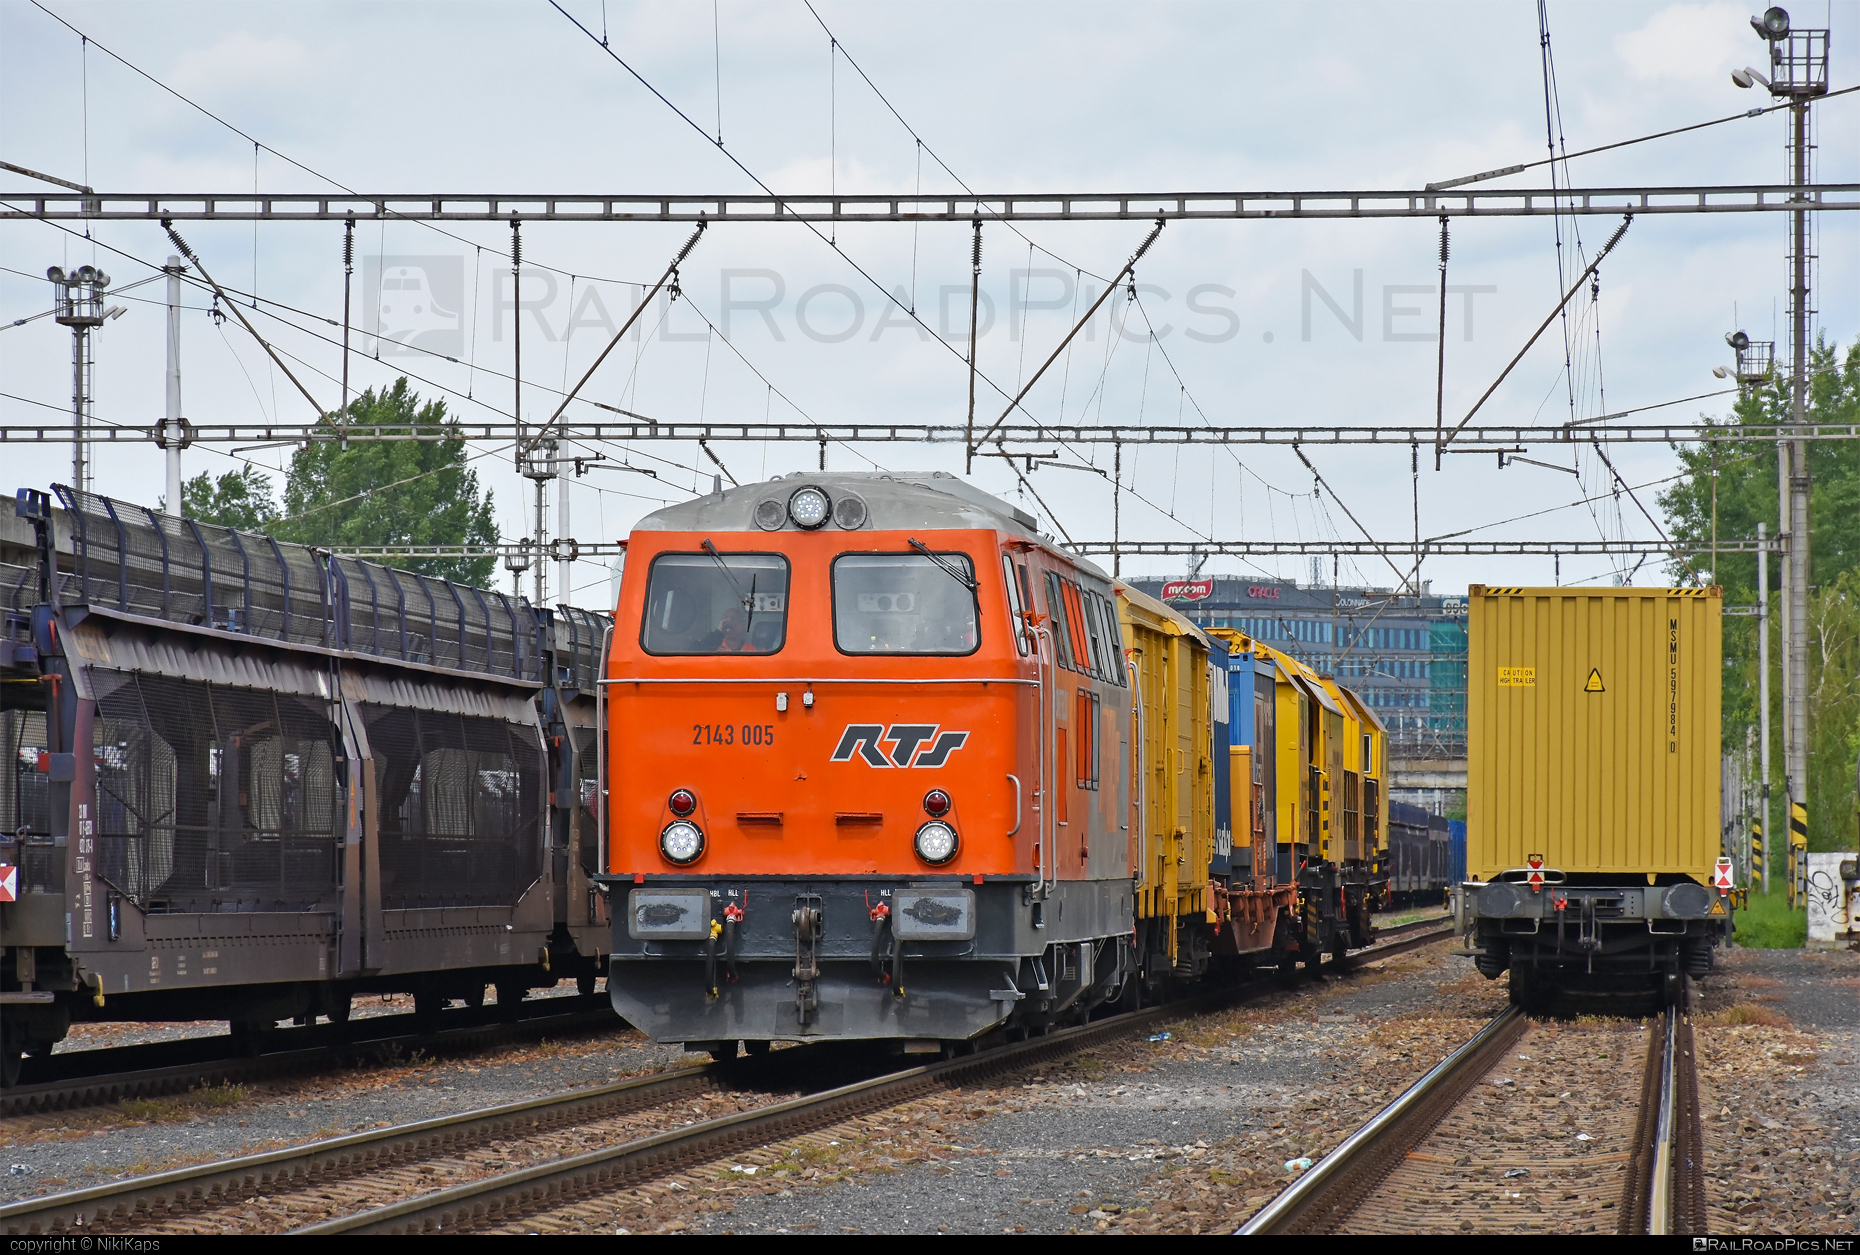 ÖBB Class 2143 - 2143 005 operated by RTS Rail Transport Service GmbH #obb2143 #obbClass2143 #railtransportservicegmbh #rts #rtsrailtransportservice #sgp2143 #swietelsky